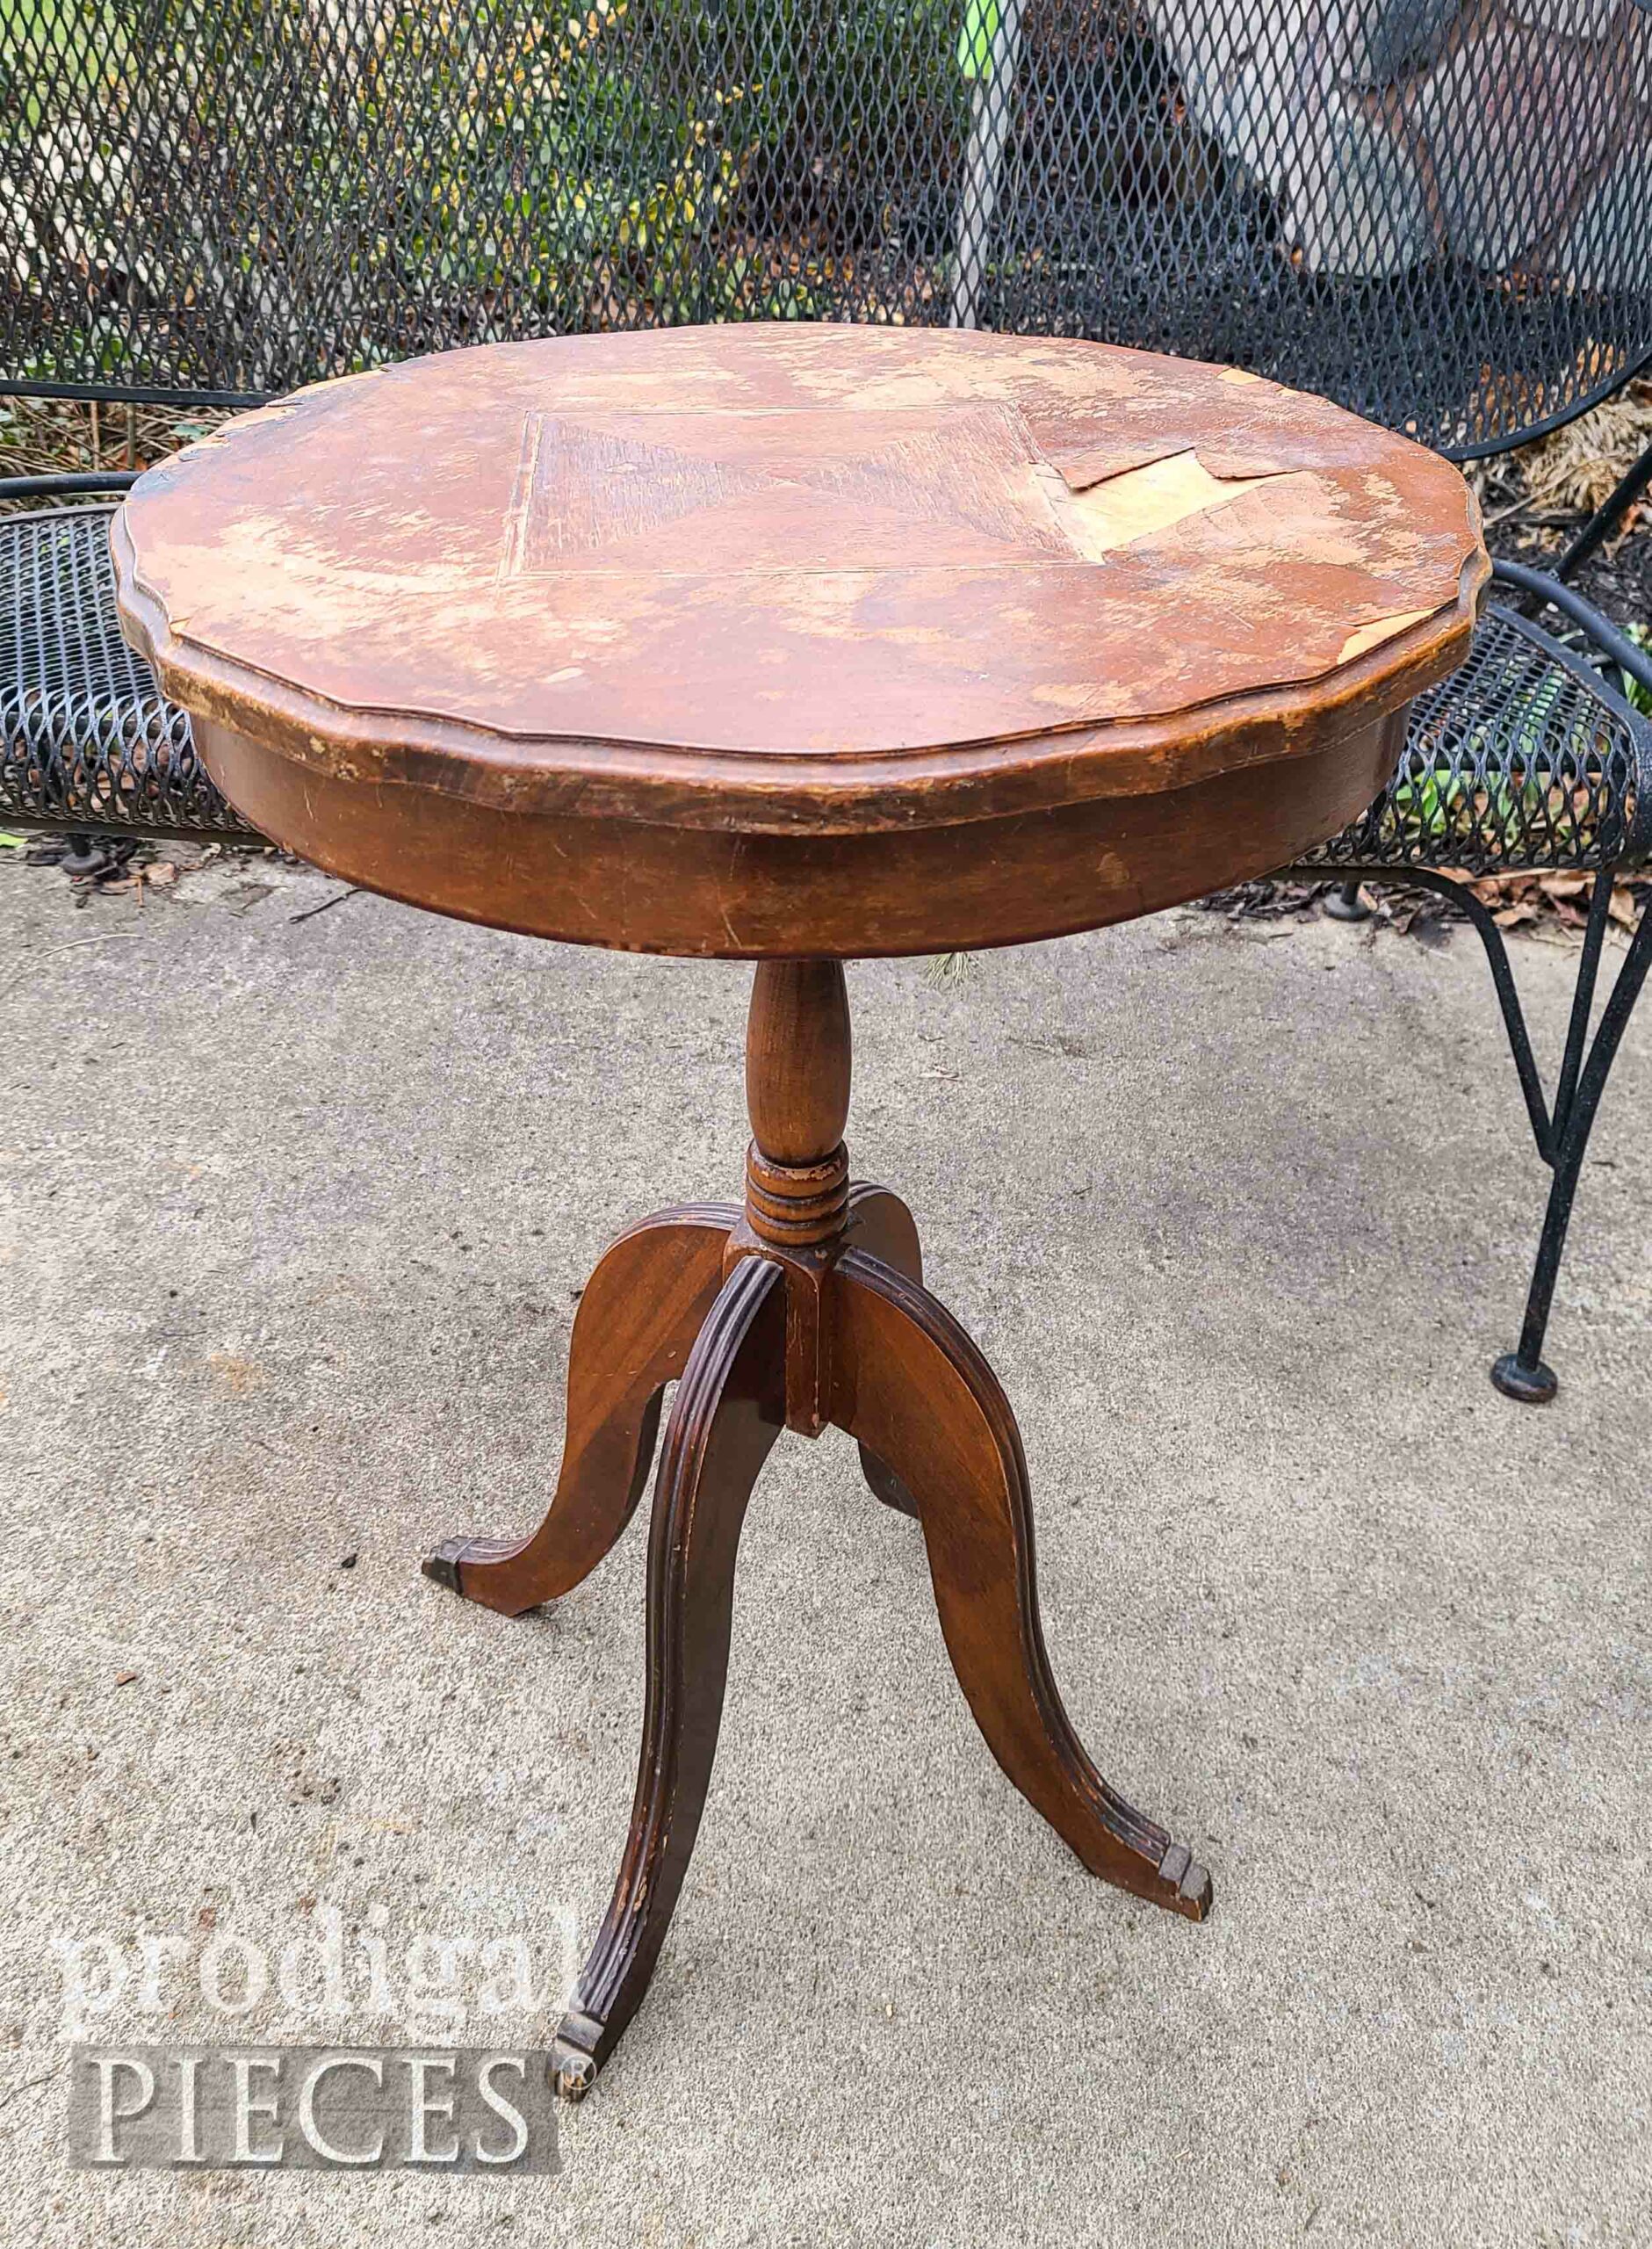 Damaged Side Table Before Makeover by Larissa of Prodigal Pieces | prodigalpieces.com #prodigalpieces